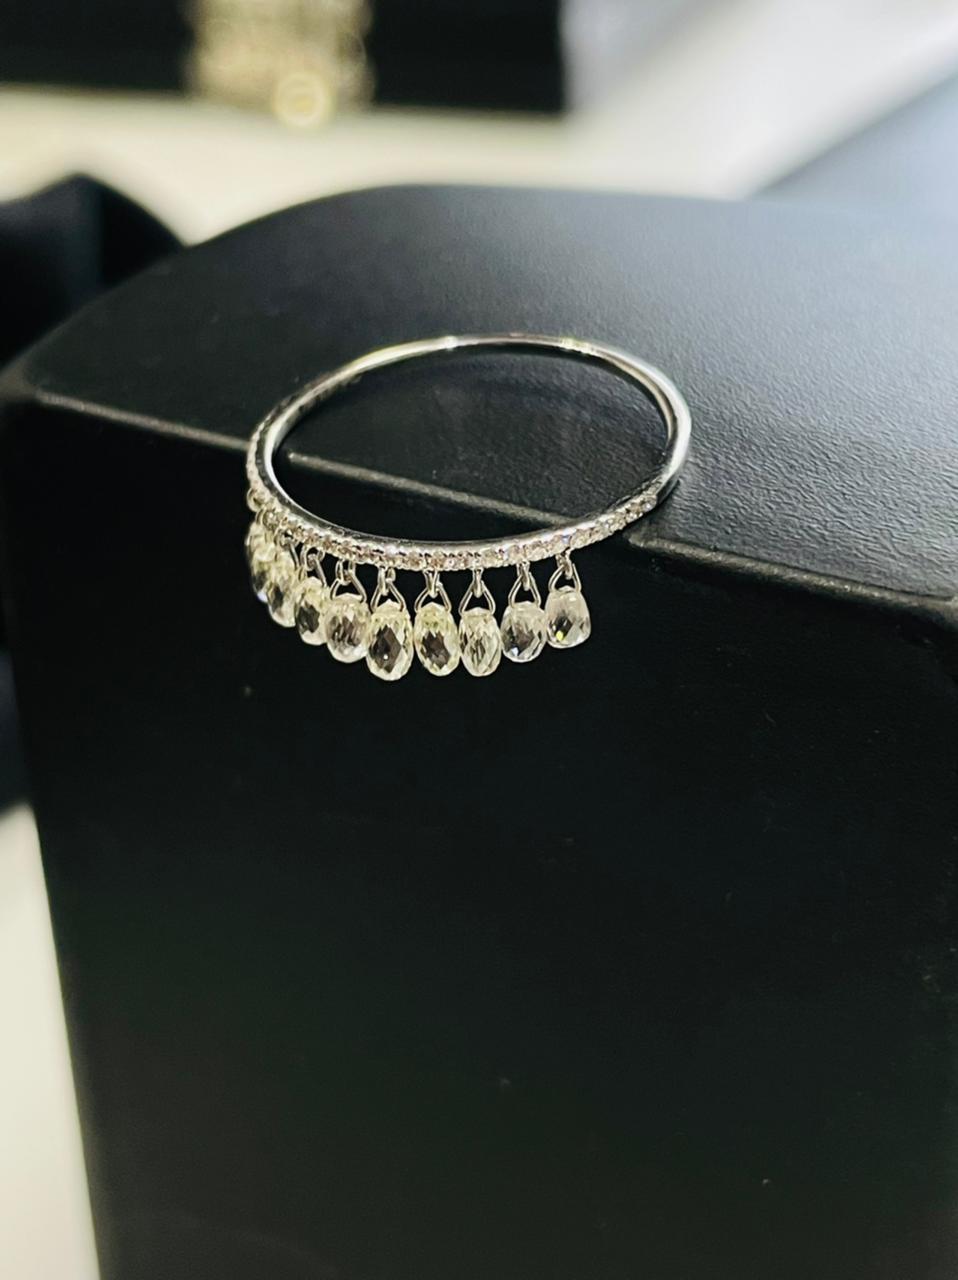 PANIM Diamond Briolettes 18K White Gold Dangling Ring

Inspired by the beauty of a rain drop, Our eccentric Dangling diamond ring is an absolute show-stopper. it has 10 pieces Rain Drops Diamond Briolettes set with Round Diamond.

Ring Size US